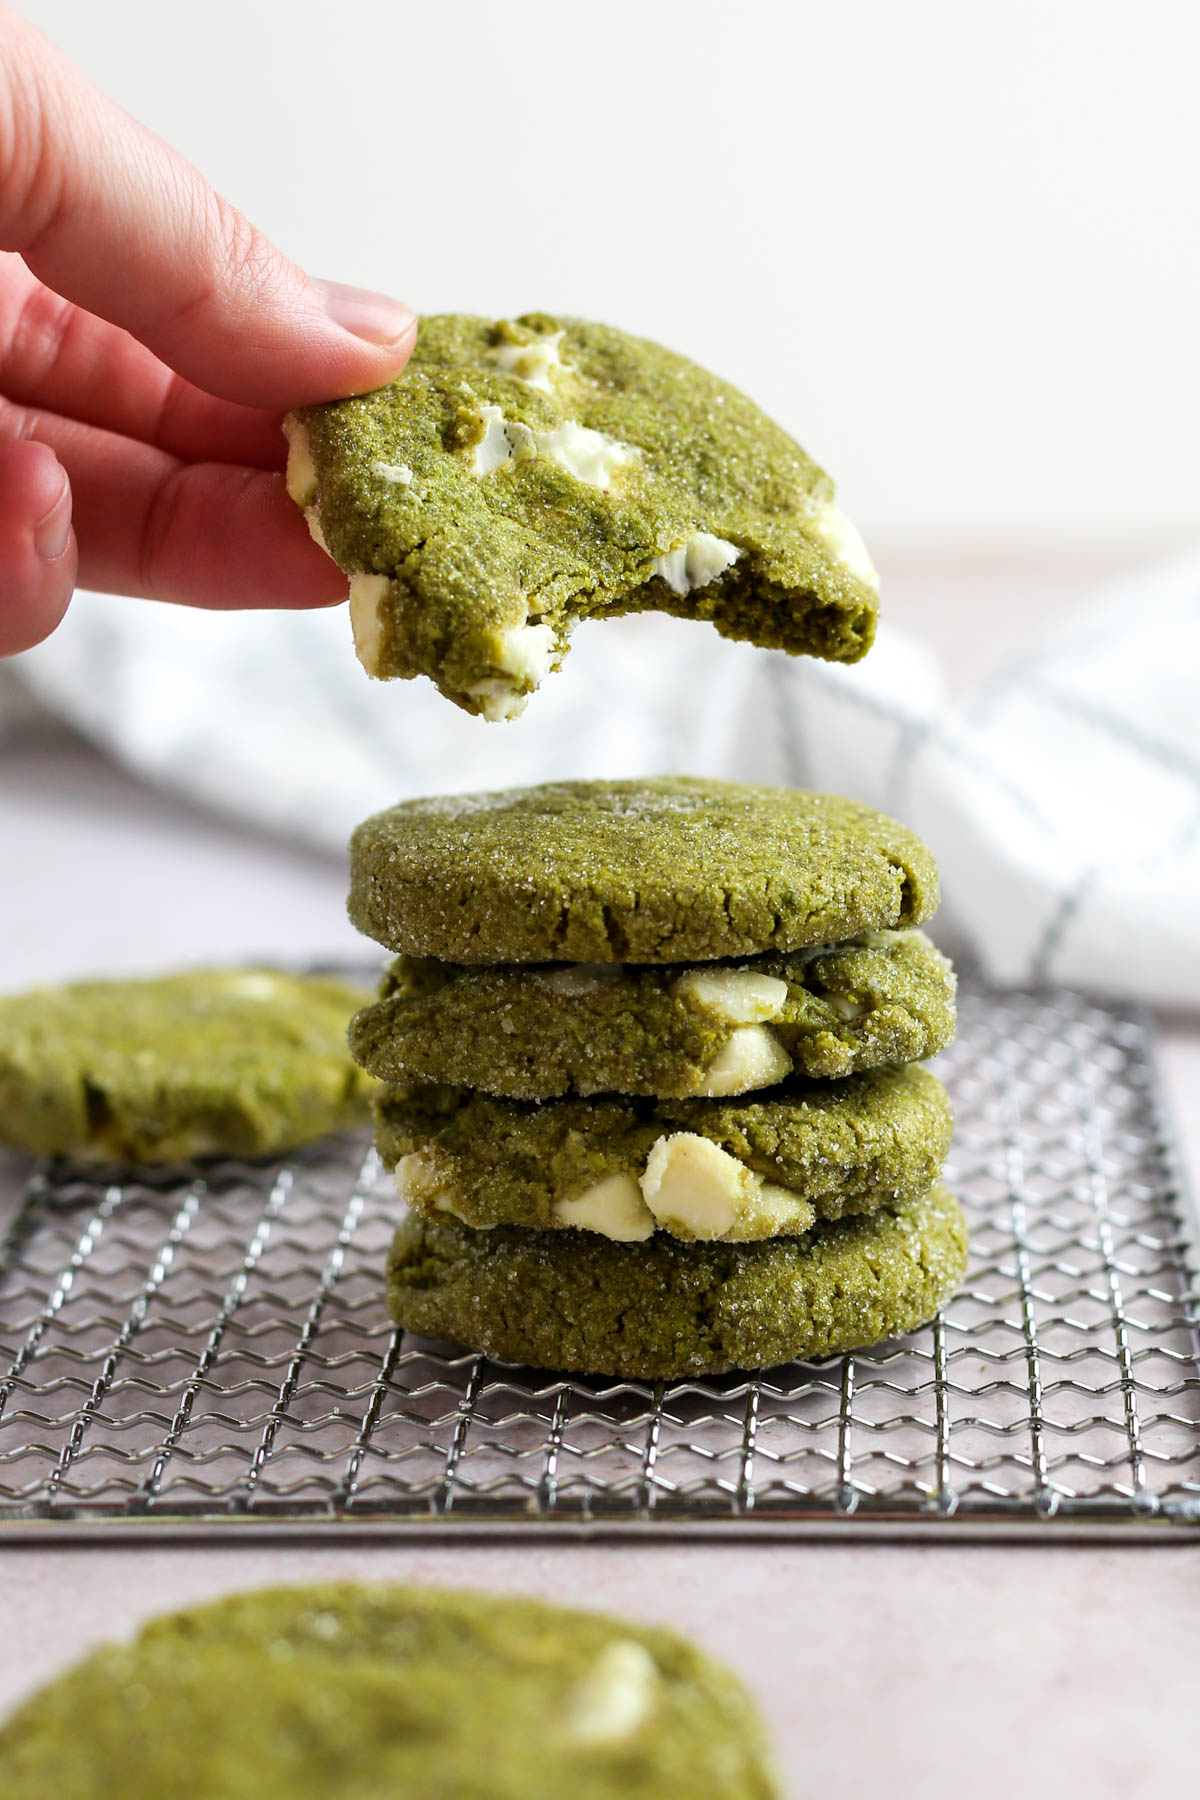 a stack of five matcha cookies, with the top cookie being picked up by someone's hand.